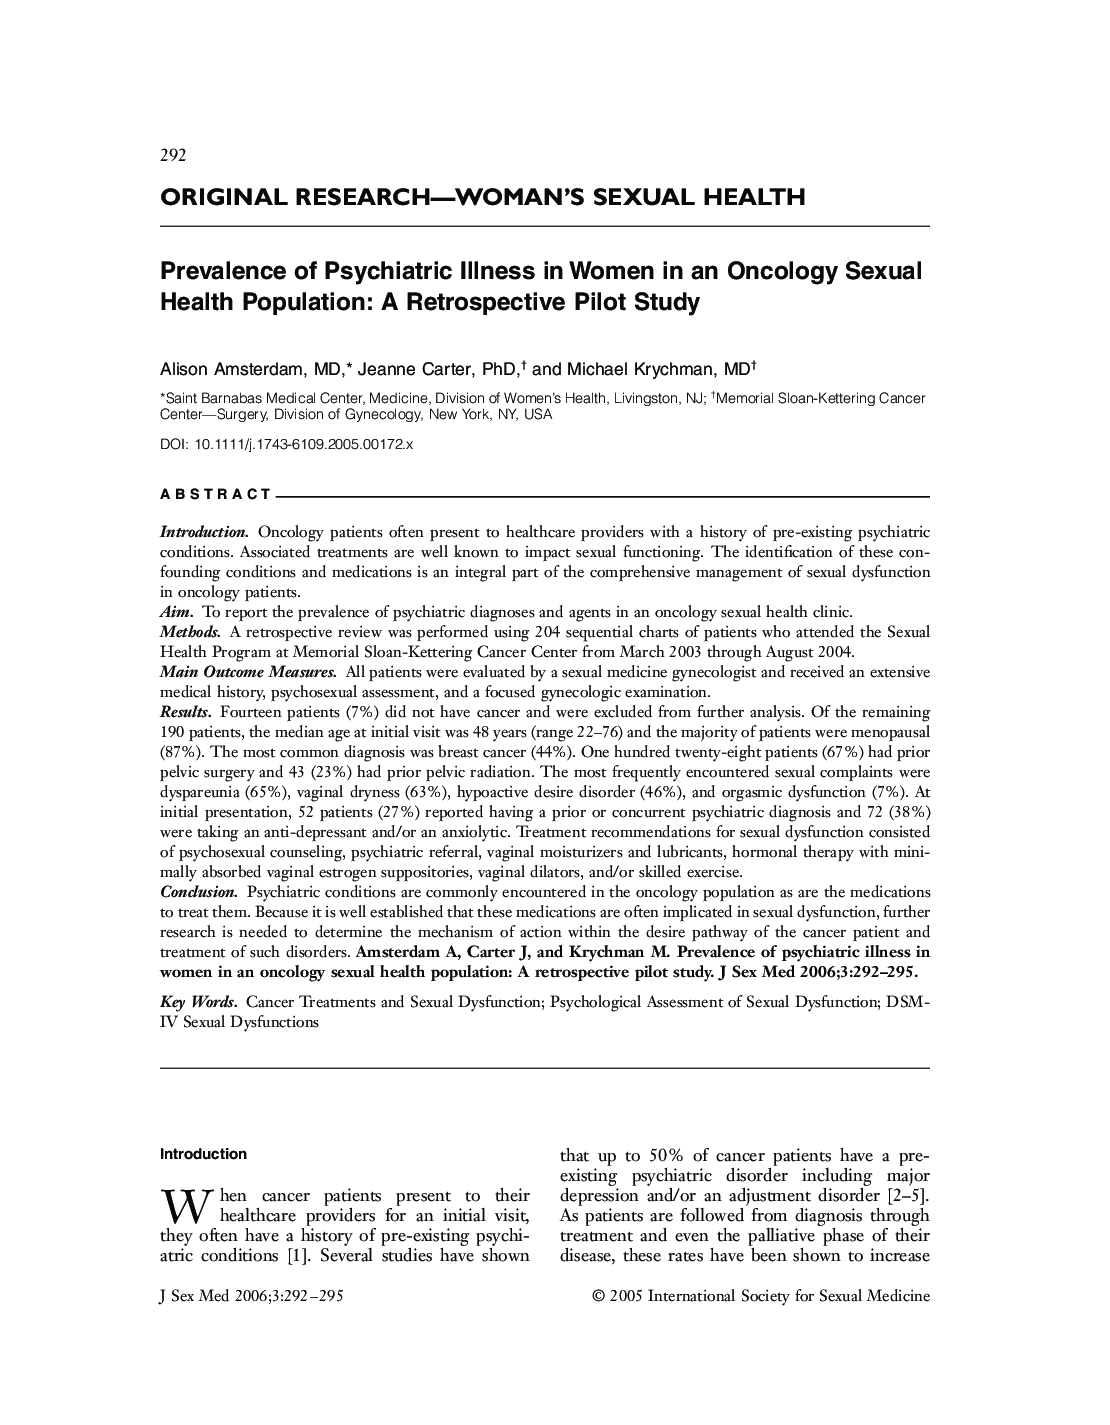 ORIGINAL RESEARCH-WOMAN'S SEXUAL HEALTH: Prevalence of Psychiatric Illness in Women in an Oncology Sexual Health Population: A Retrospective Pilot Study